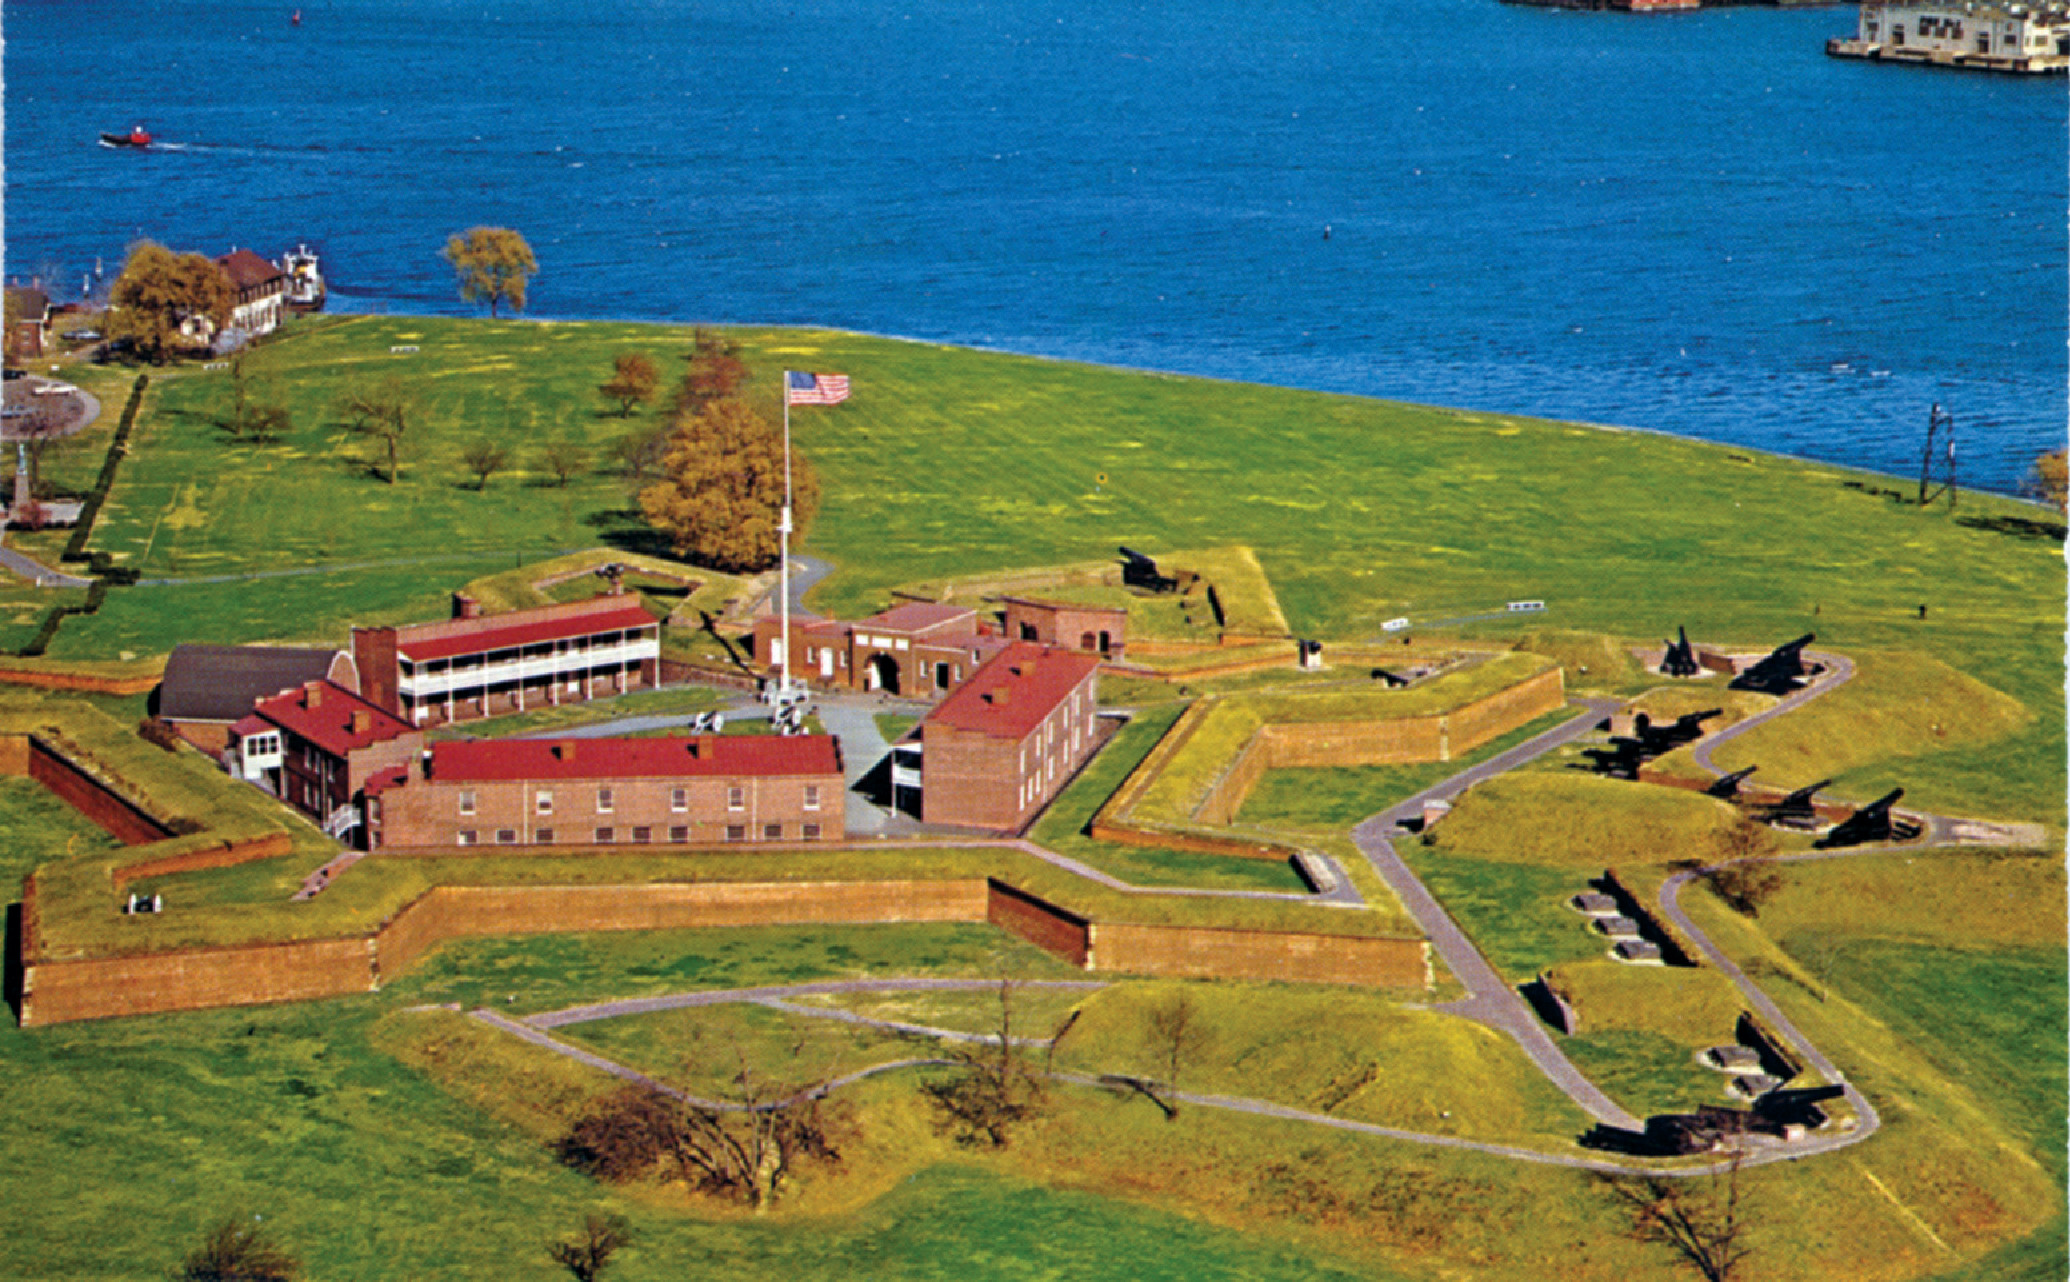 Fort McHenry as it appears today.